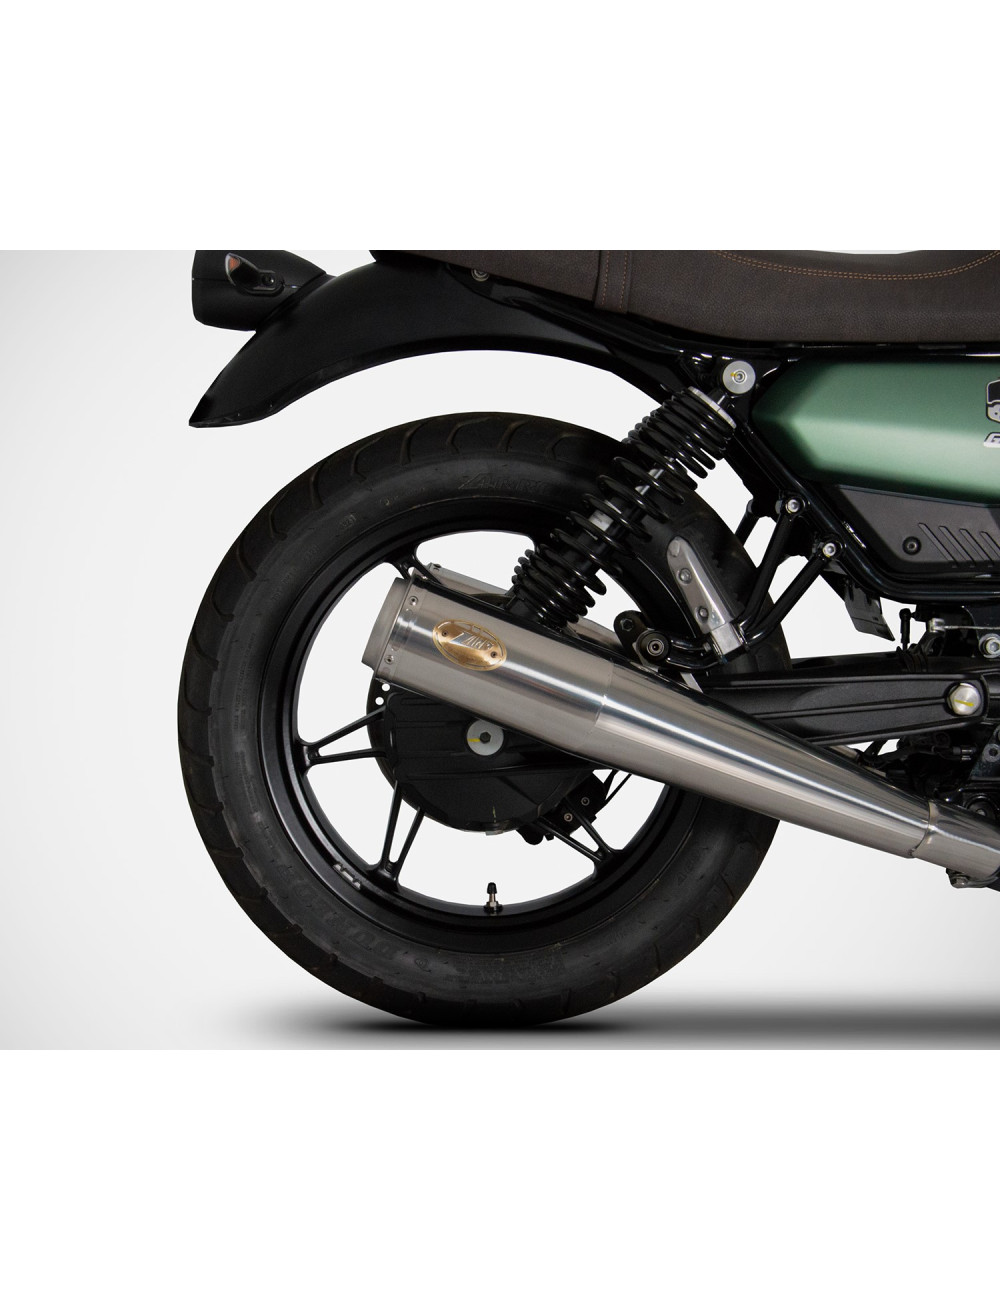 Moto Guzzi V7 850 21-23 Slip-On Approved and Racing Silencers